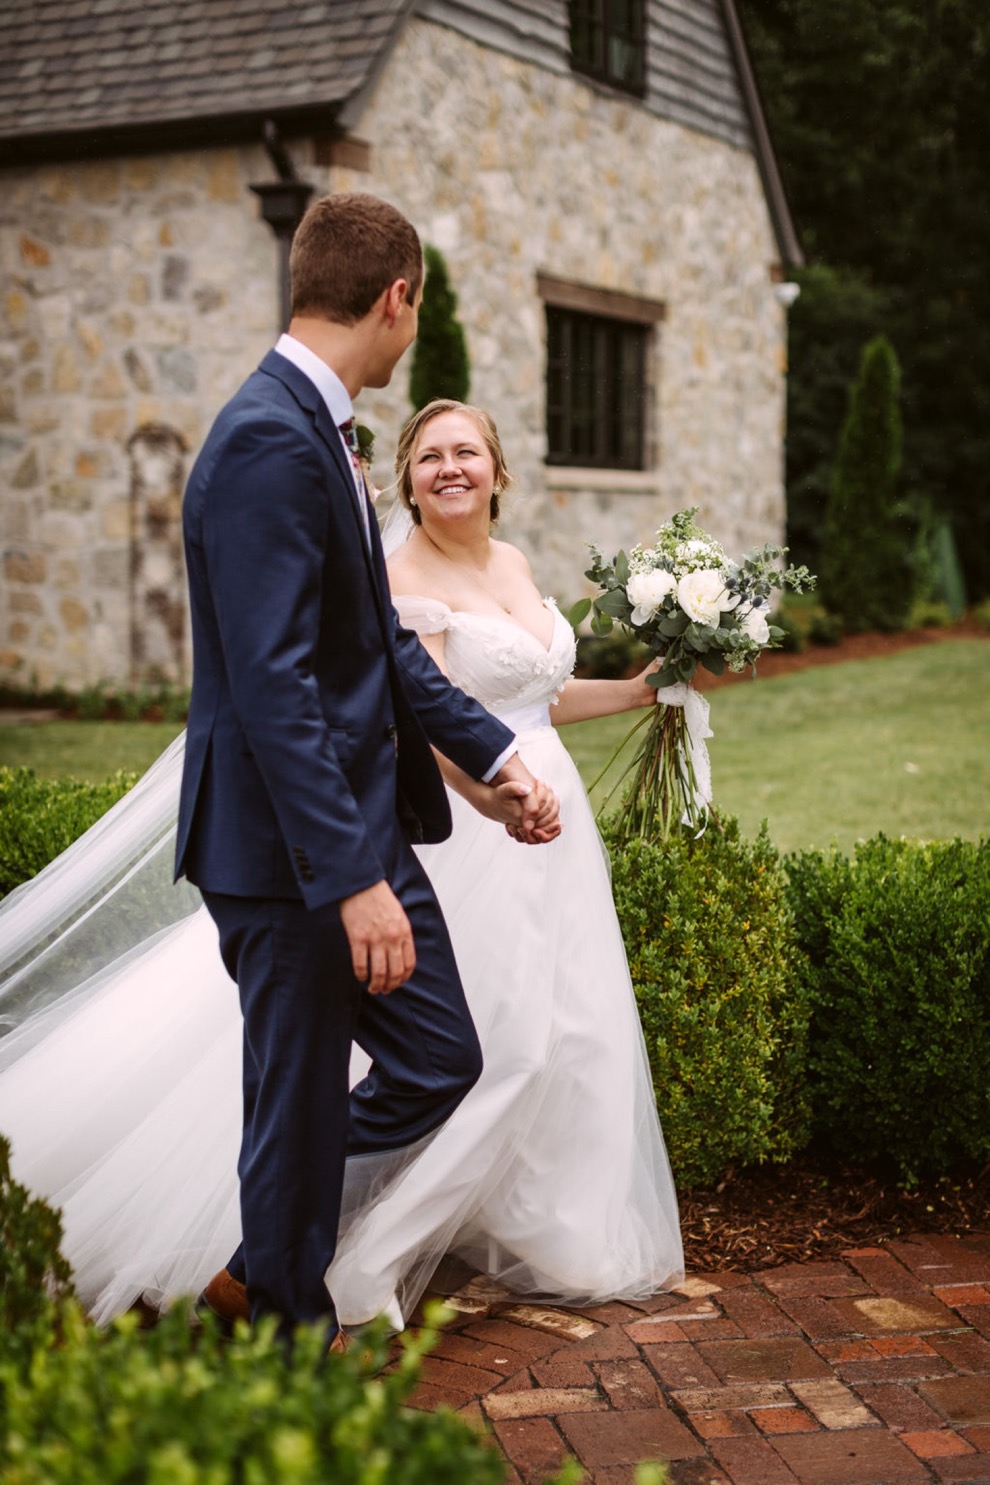 bride and groom smiling at each other as they walk down a brick path between low shrubs